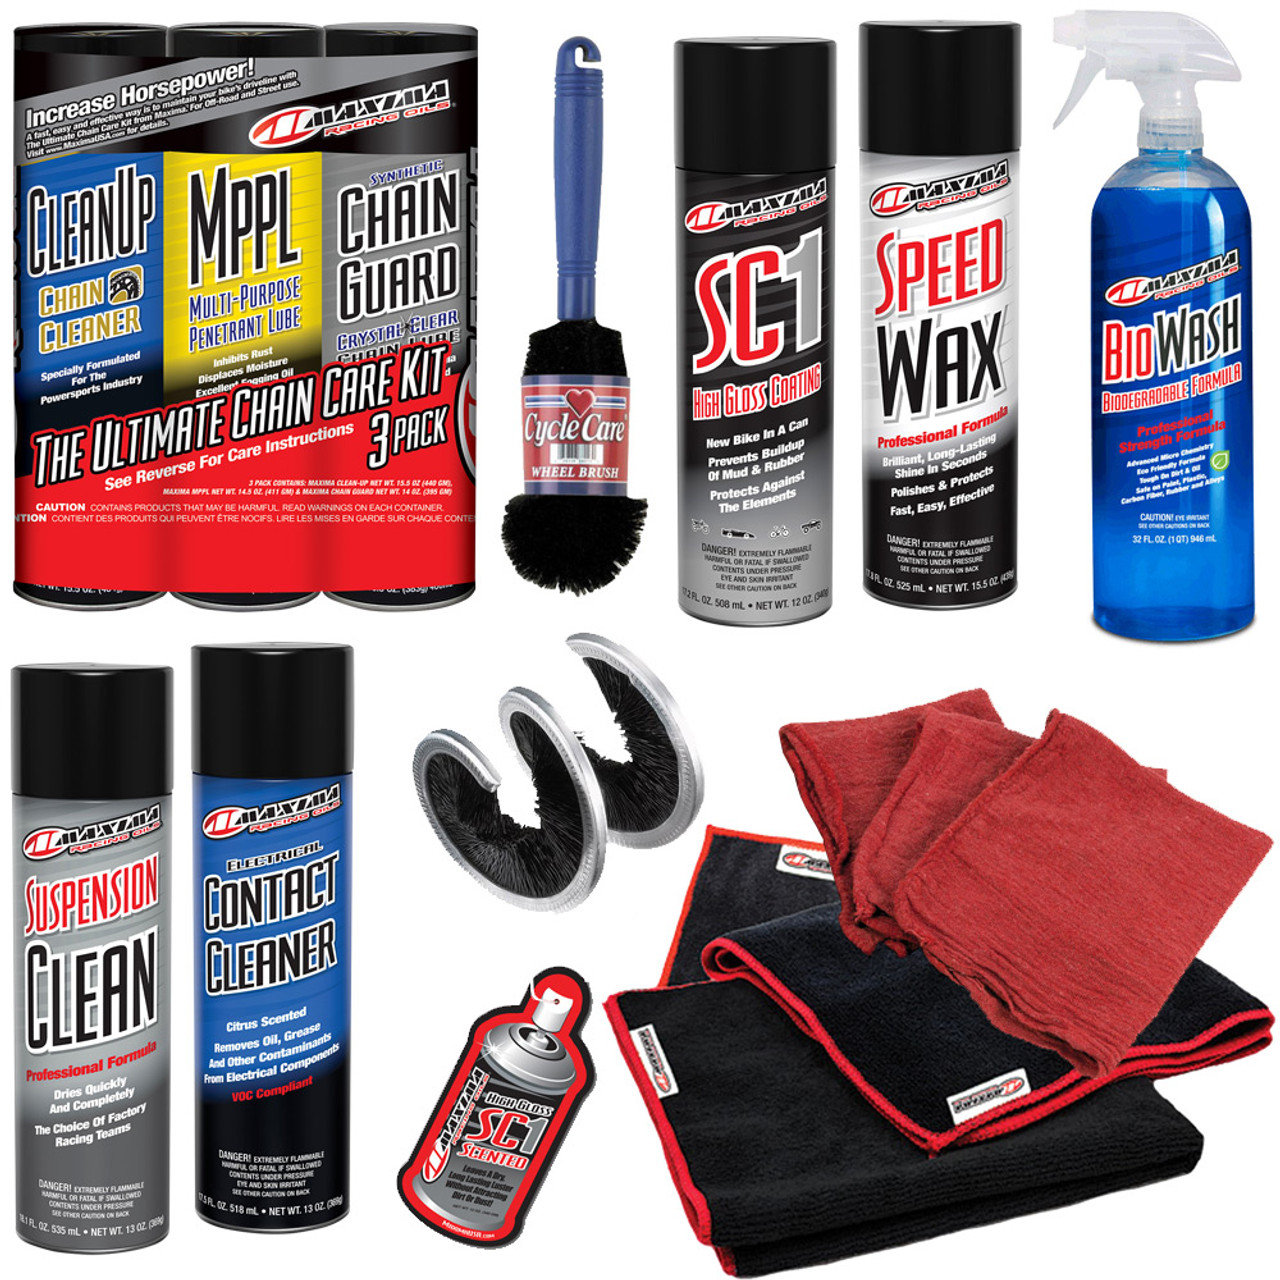 ELECTRICAL CONTACT CLEANER – MaximaUsa